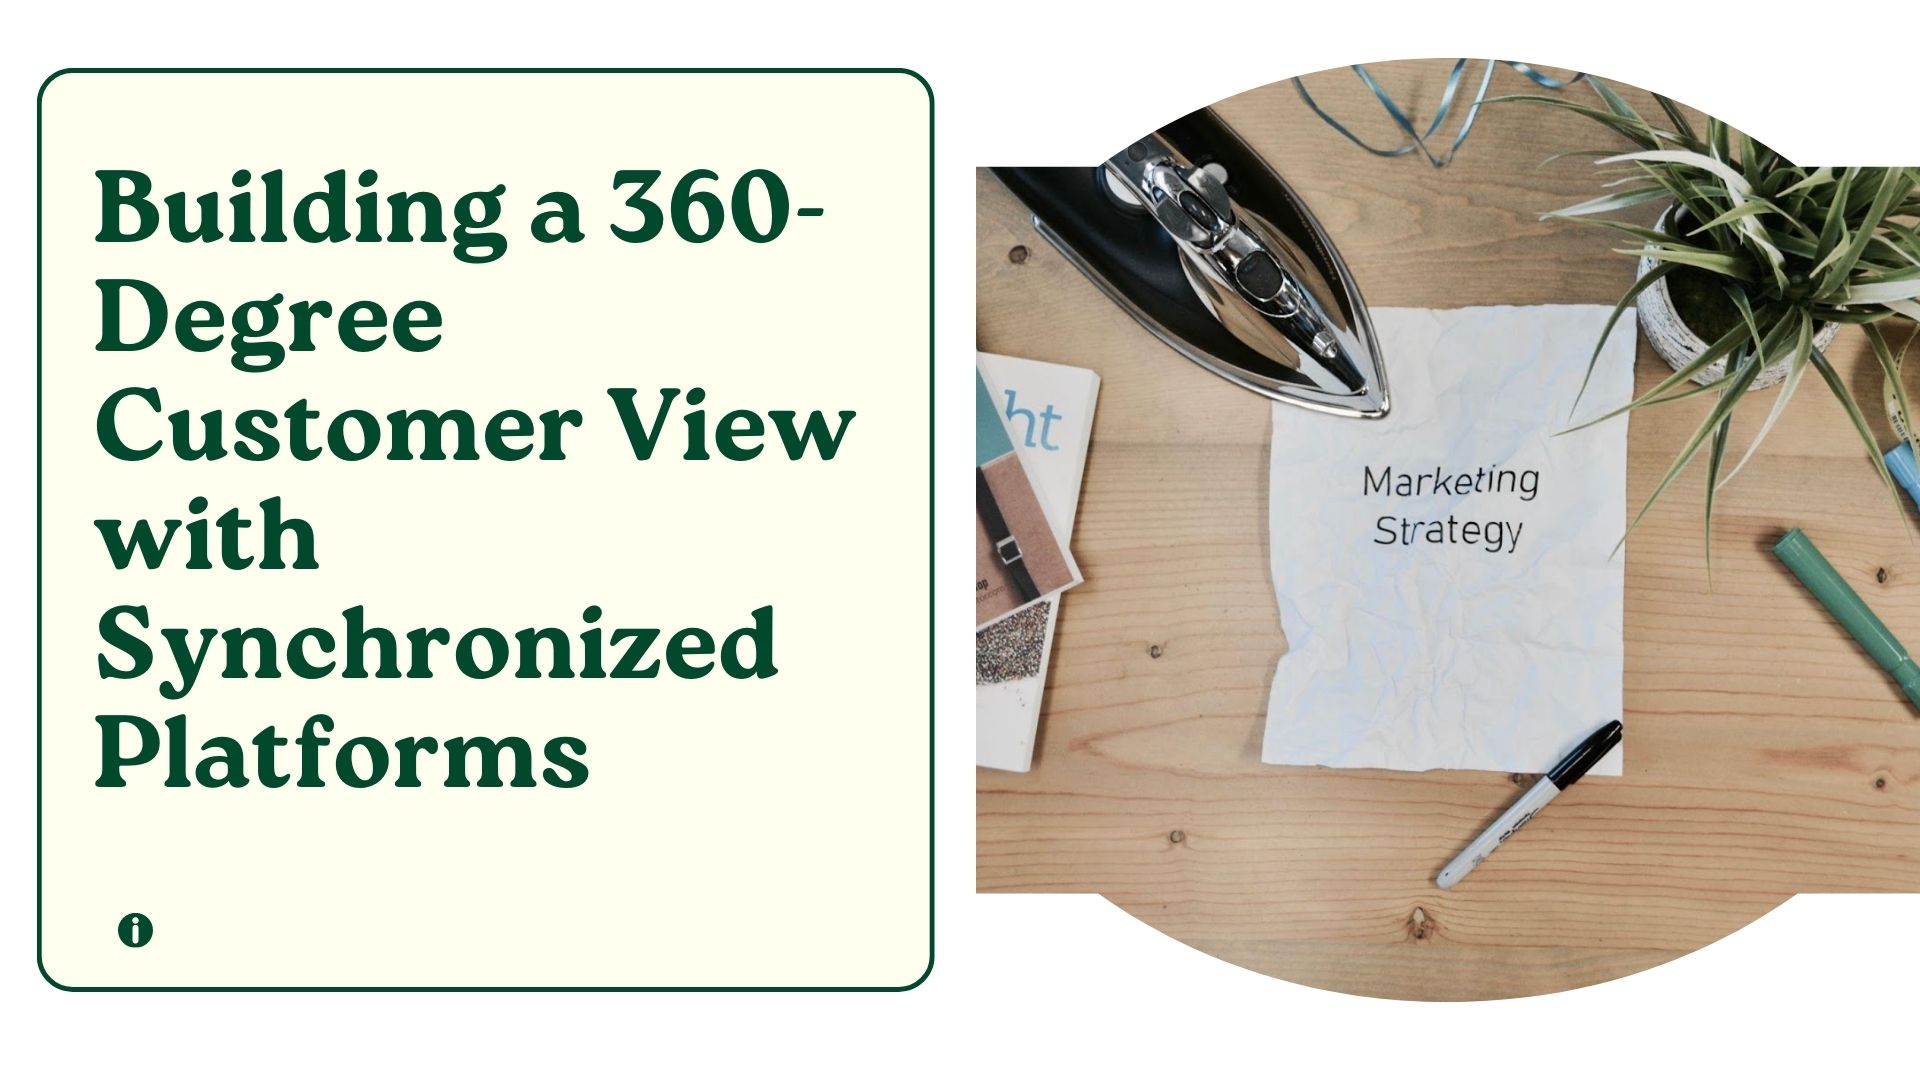 Building a 360 Degree Customer View with Synchronized Platforms